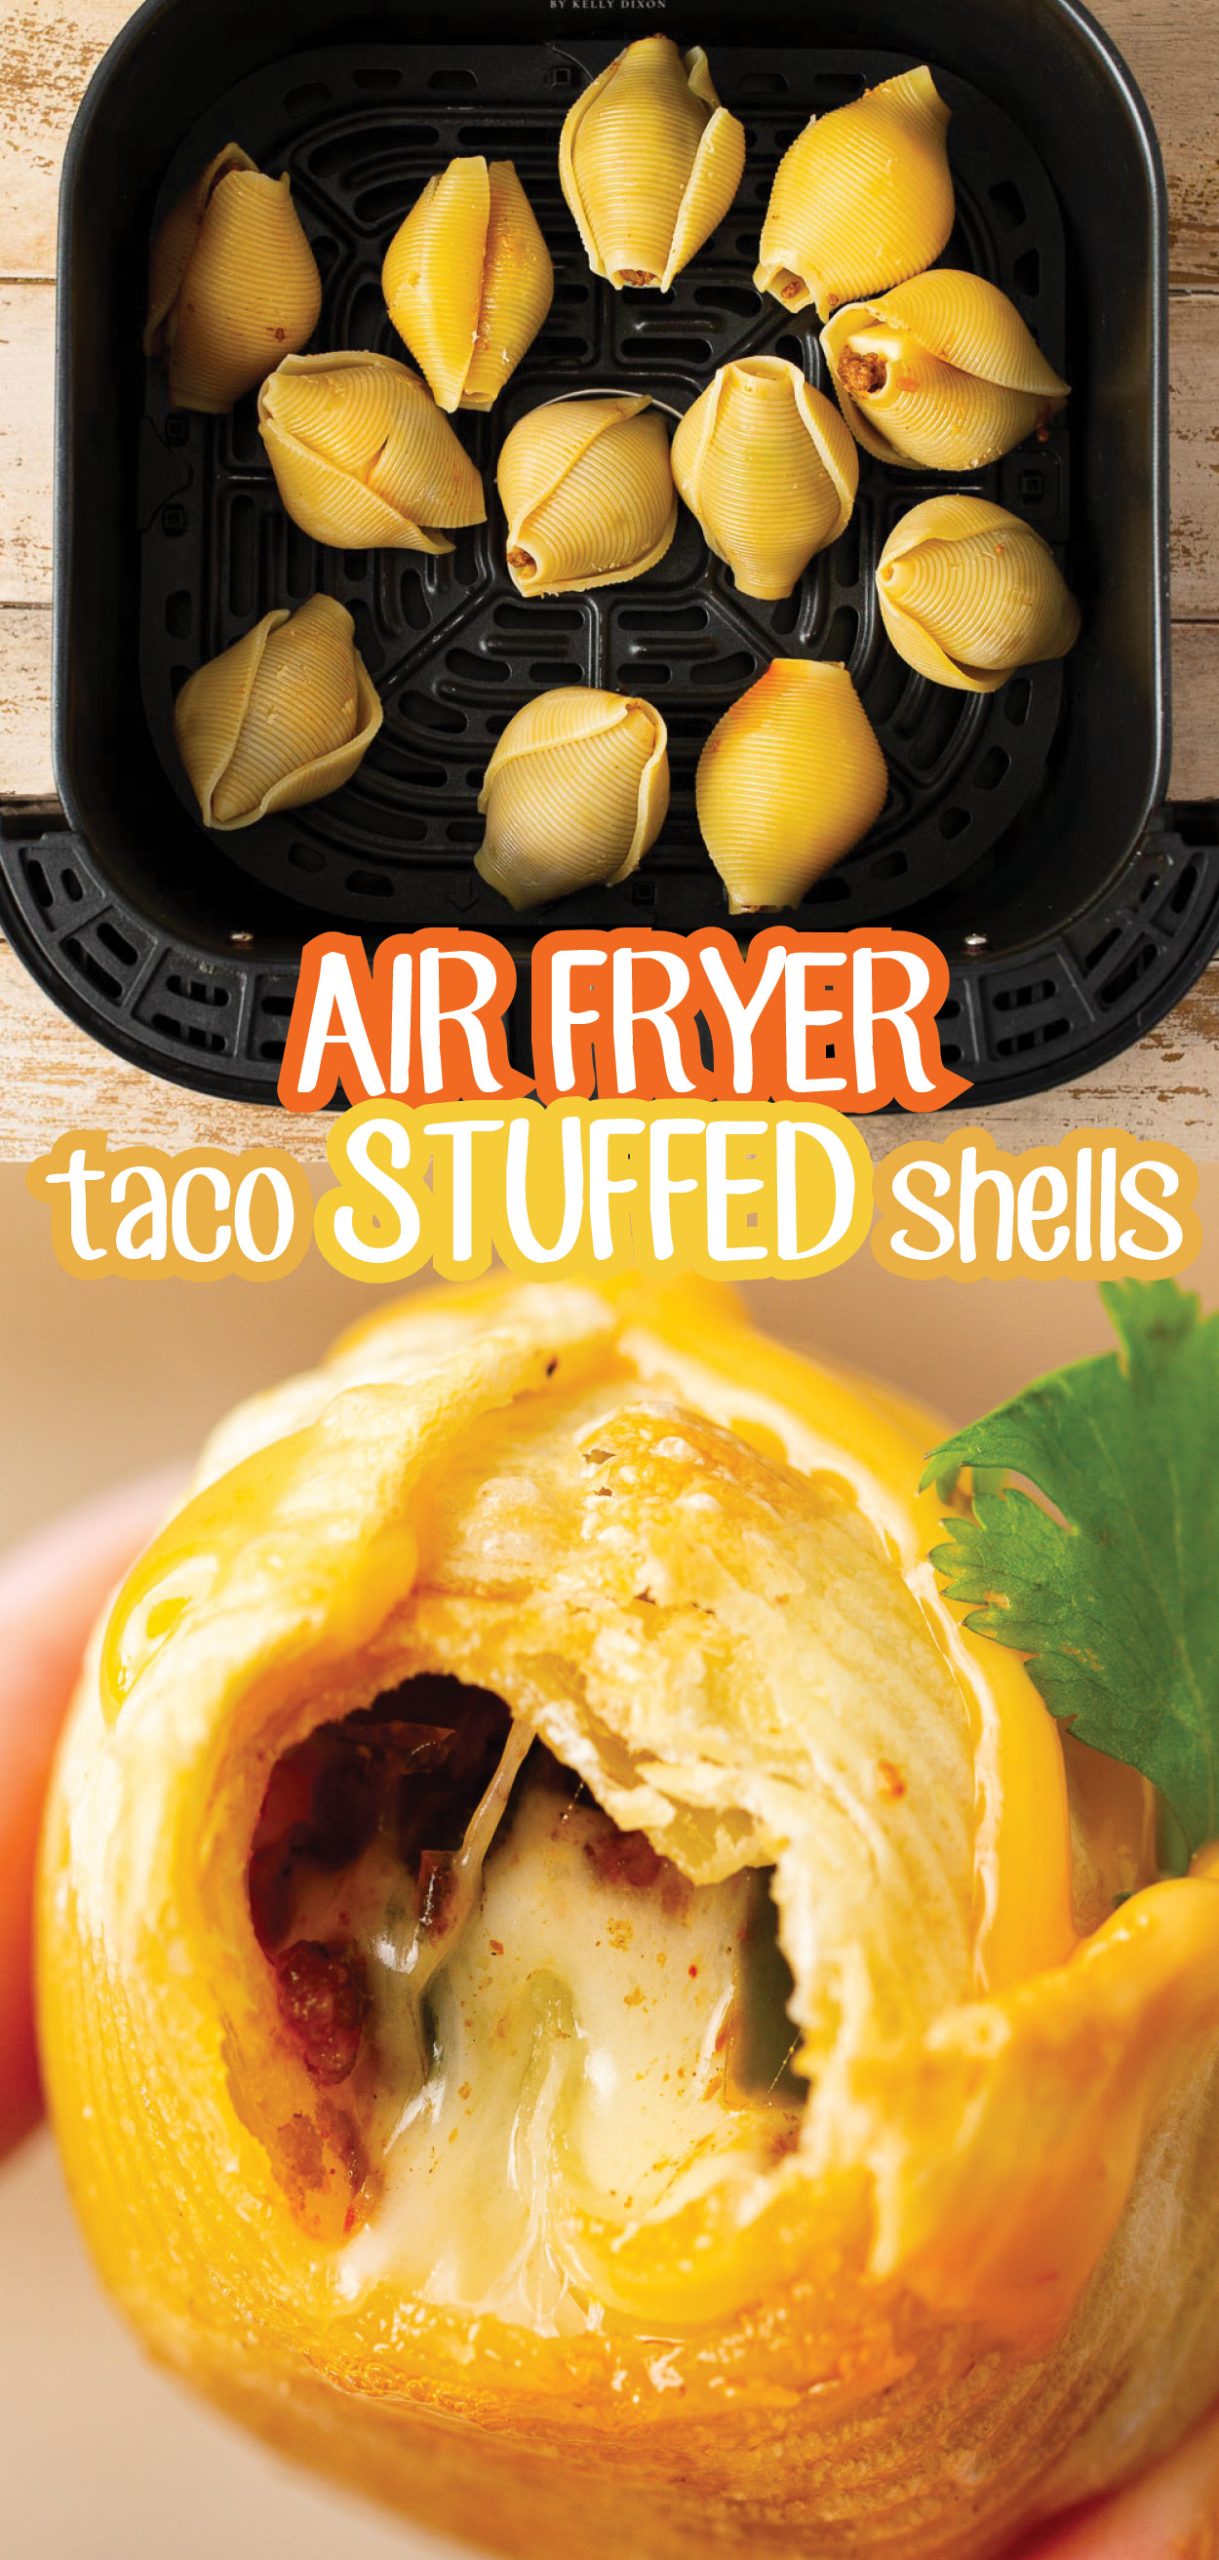 Air Fryer Taco Stuffed Shells recipe features seasoned ground beef and ooey-gooey cheese melted inside of slightly crisp air-fried shells. If you don’t have an air fryer, I’ll explain how to bake them in the oven. 